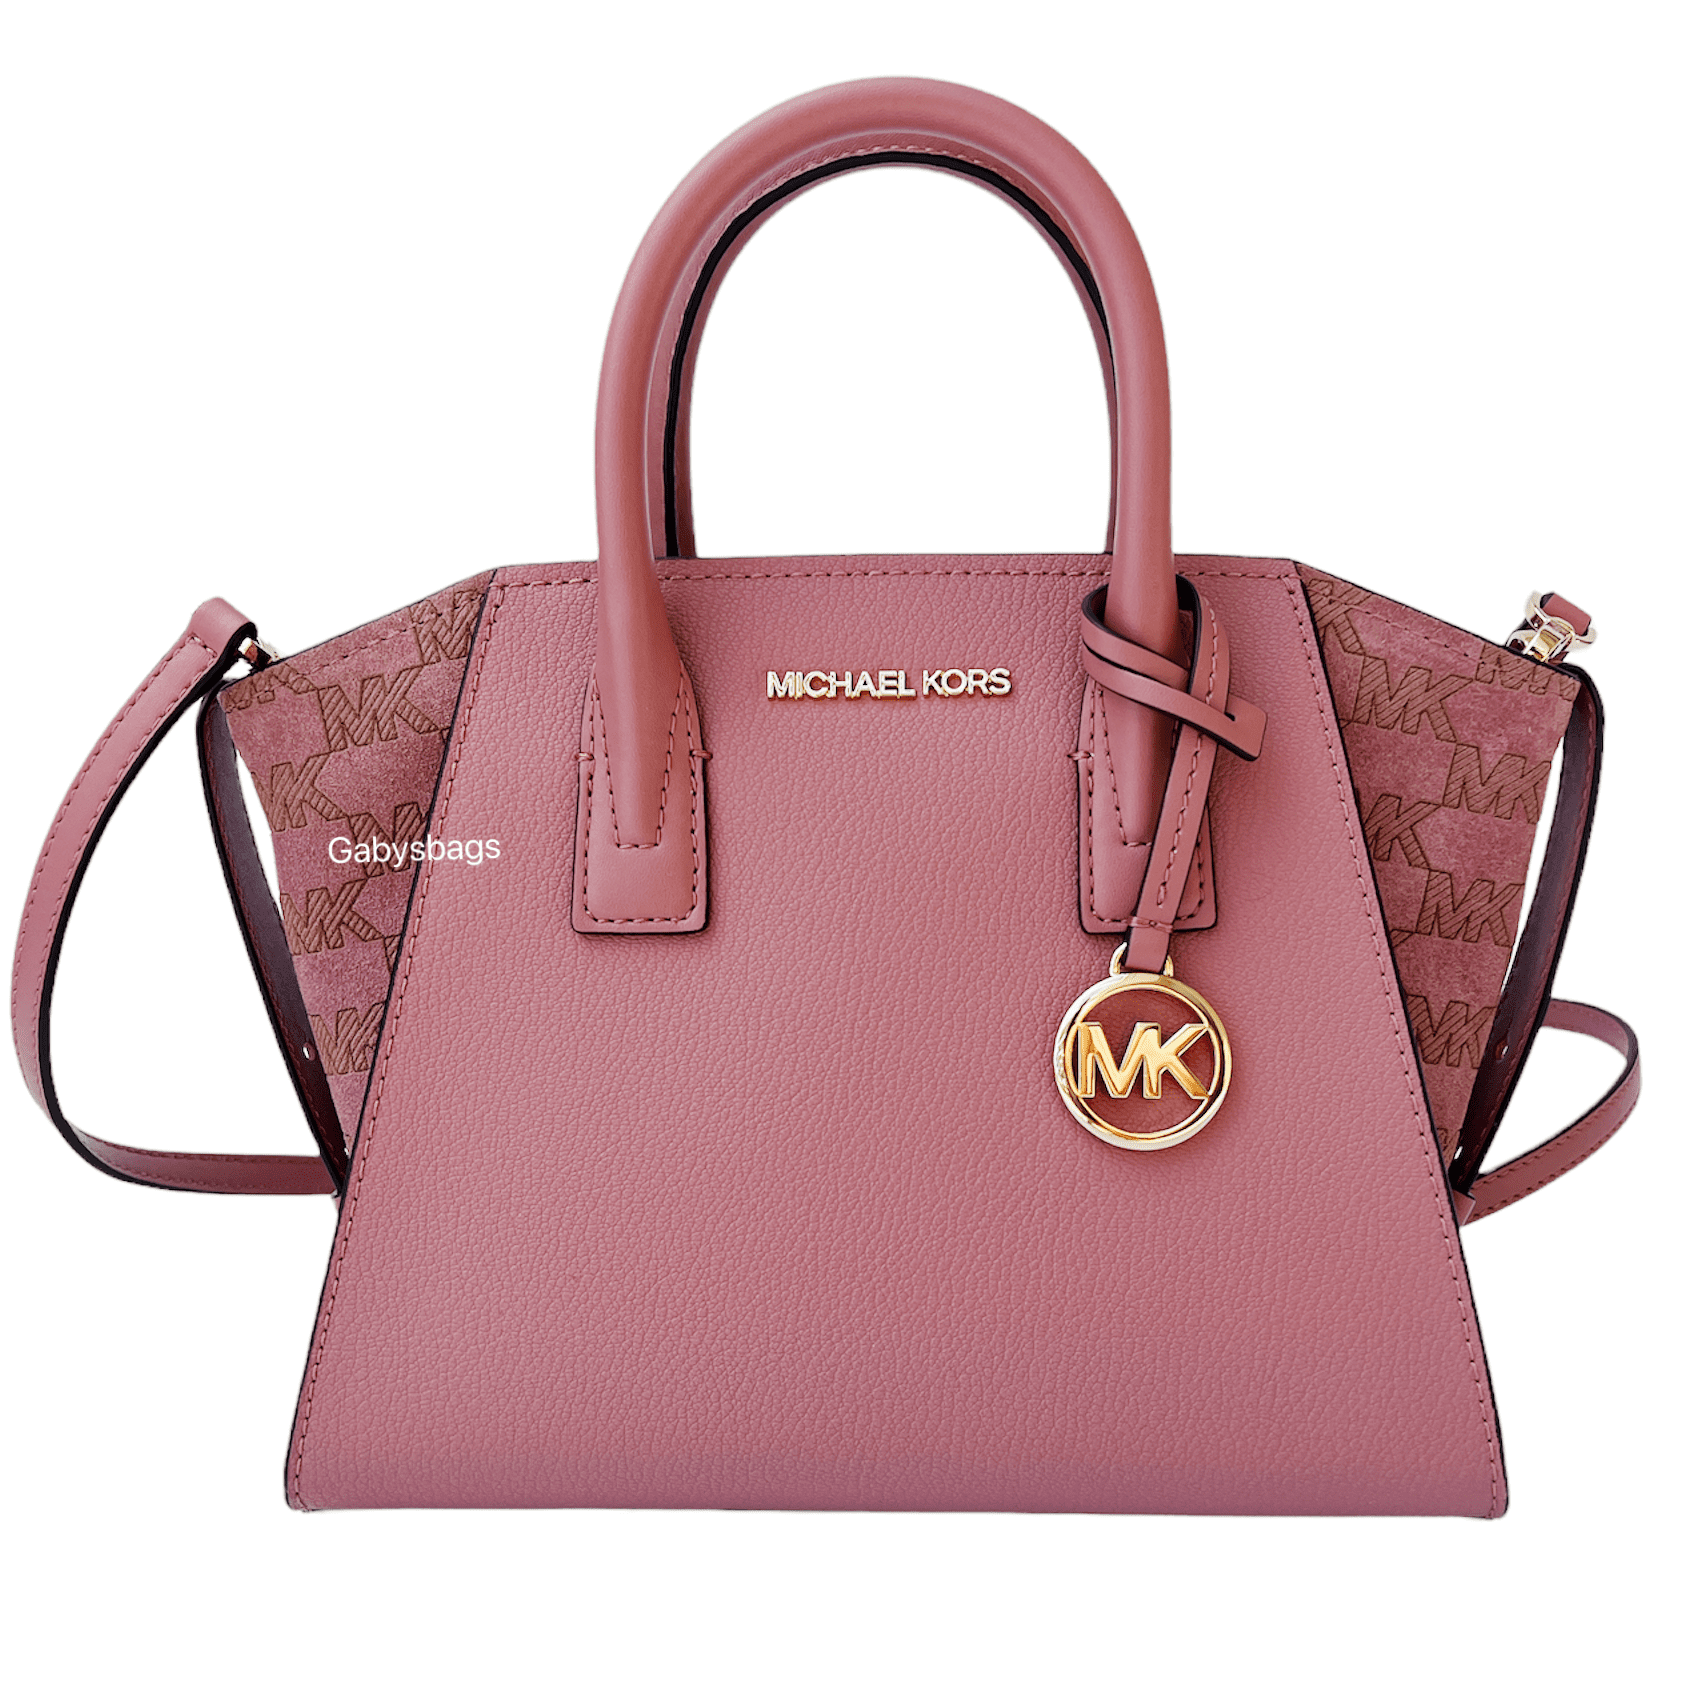 Michael Kors NWT Ellis Small Convertible Satchel Crossbody Stud Cherry Red  MK - $125 (57% Off Retail) New With Tags - From ellabella